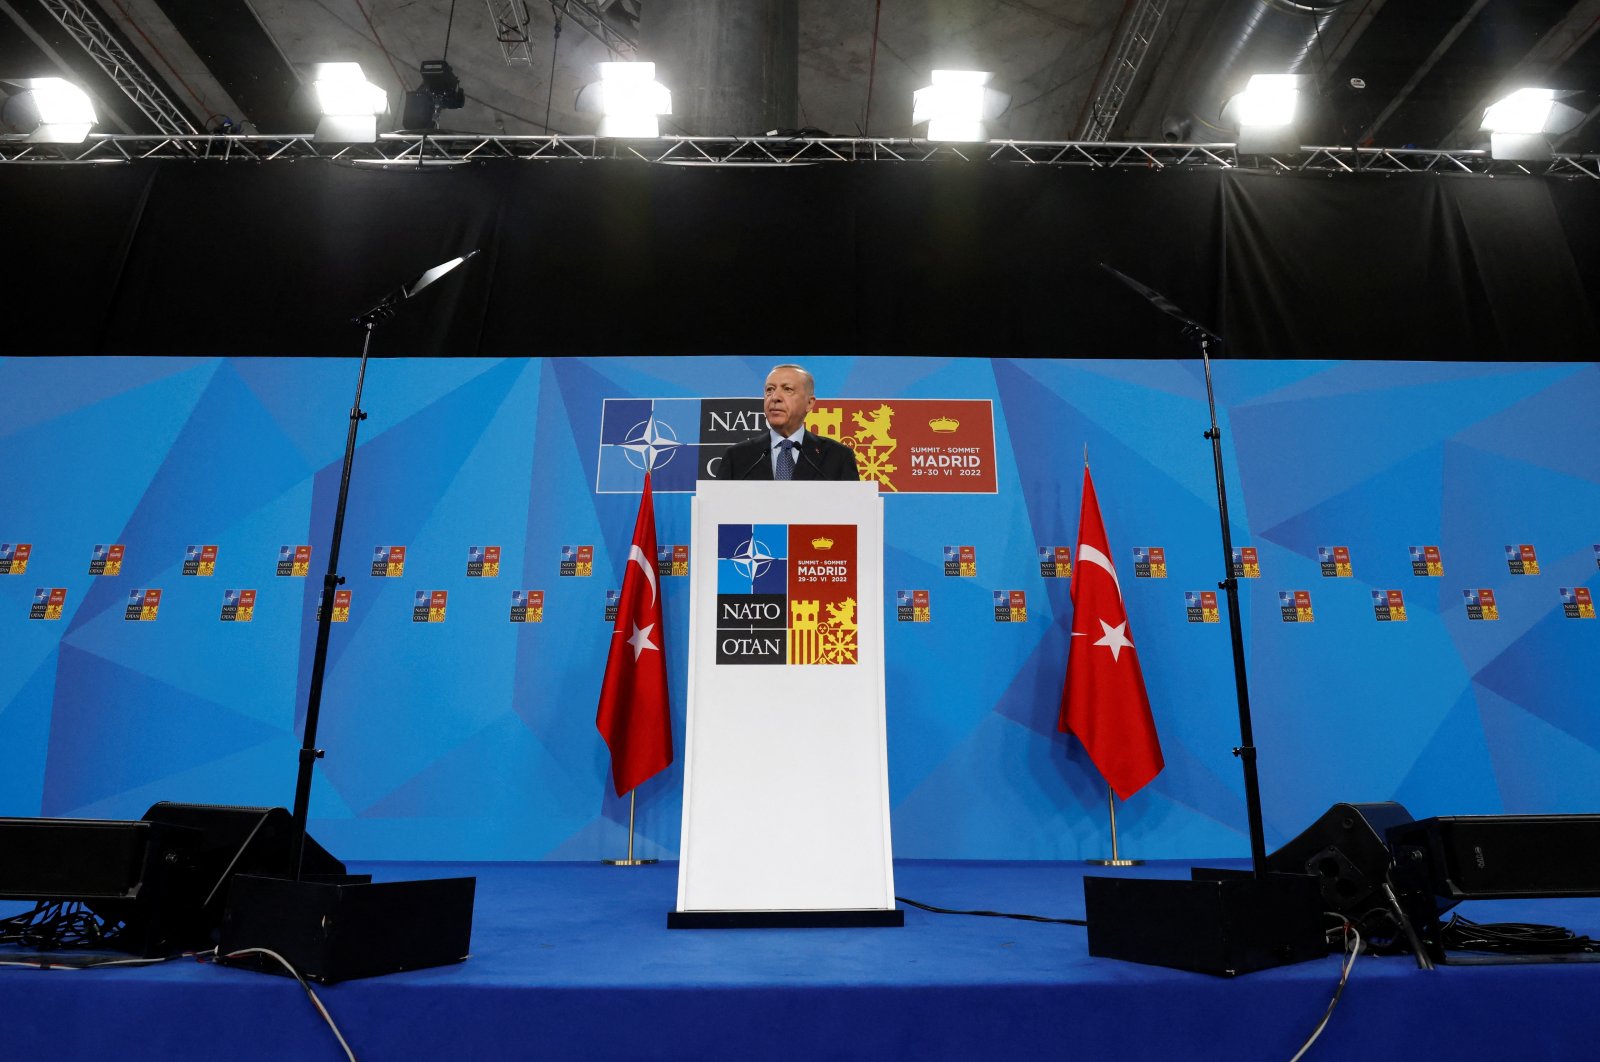 President Recep Tayyip Erdoğan attends a news conference during a NATO summit in Madrid, Spain, June 30, 2022. (Reuters Photo)